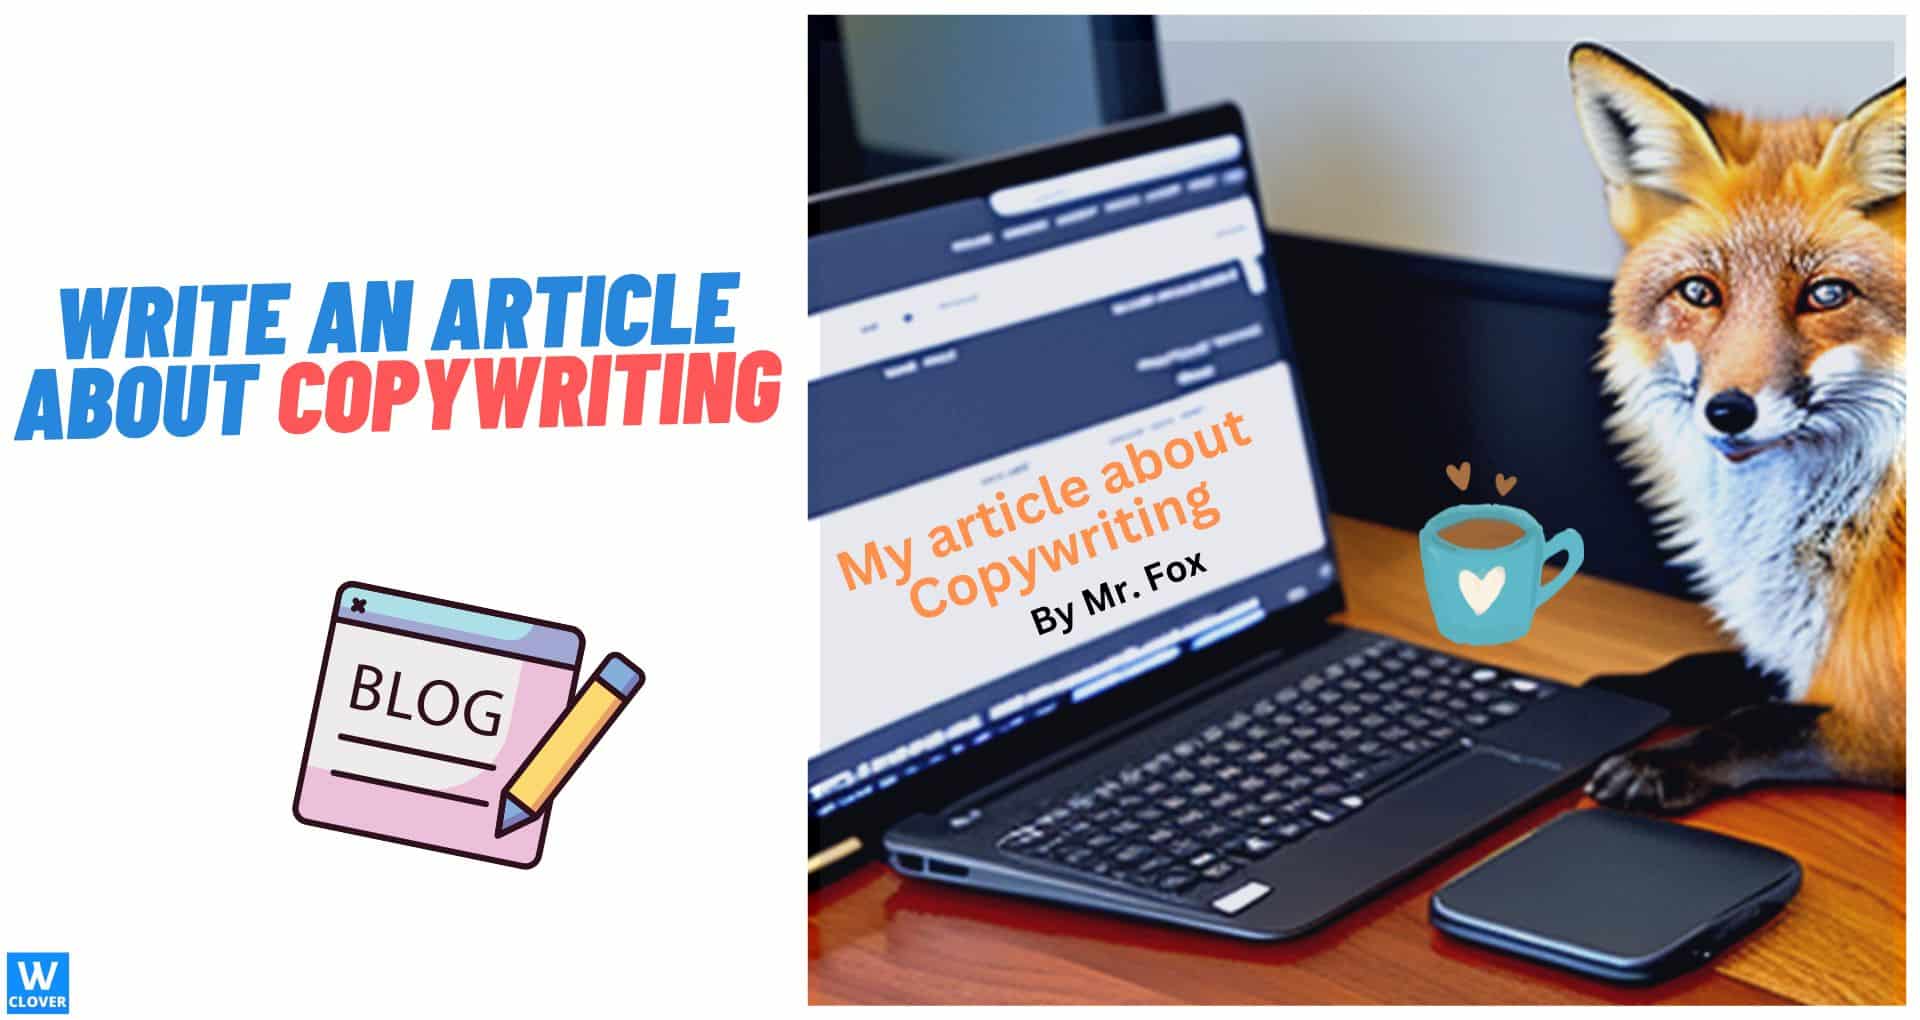 Write an article about copywriting